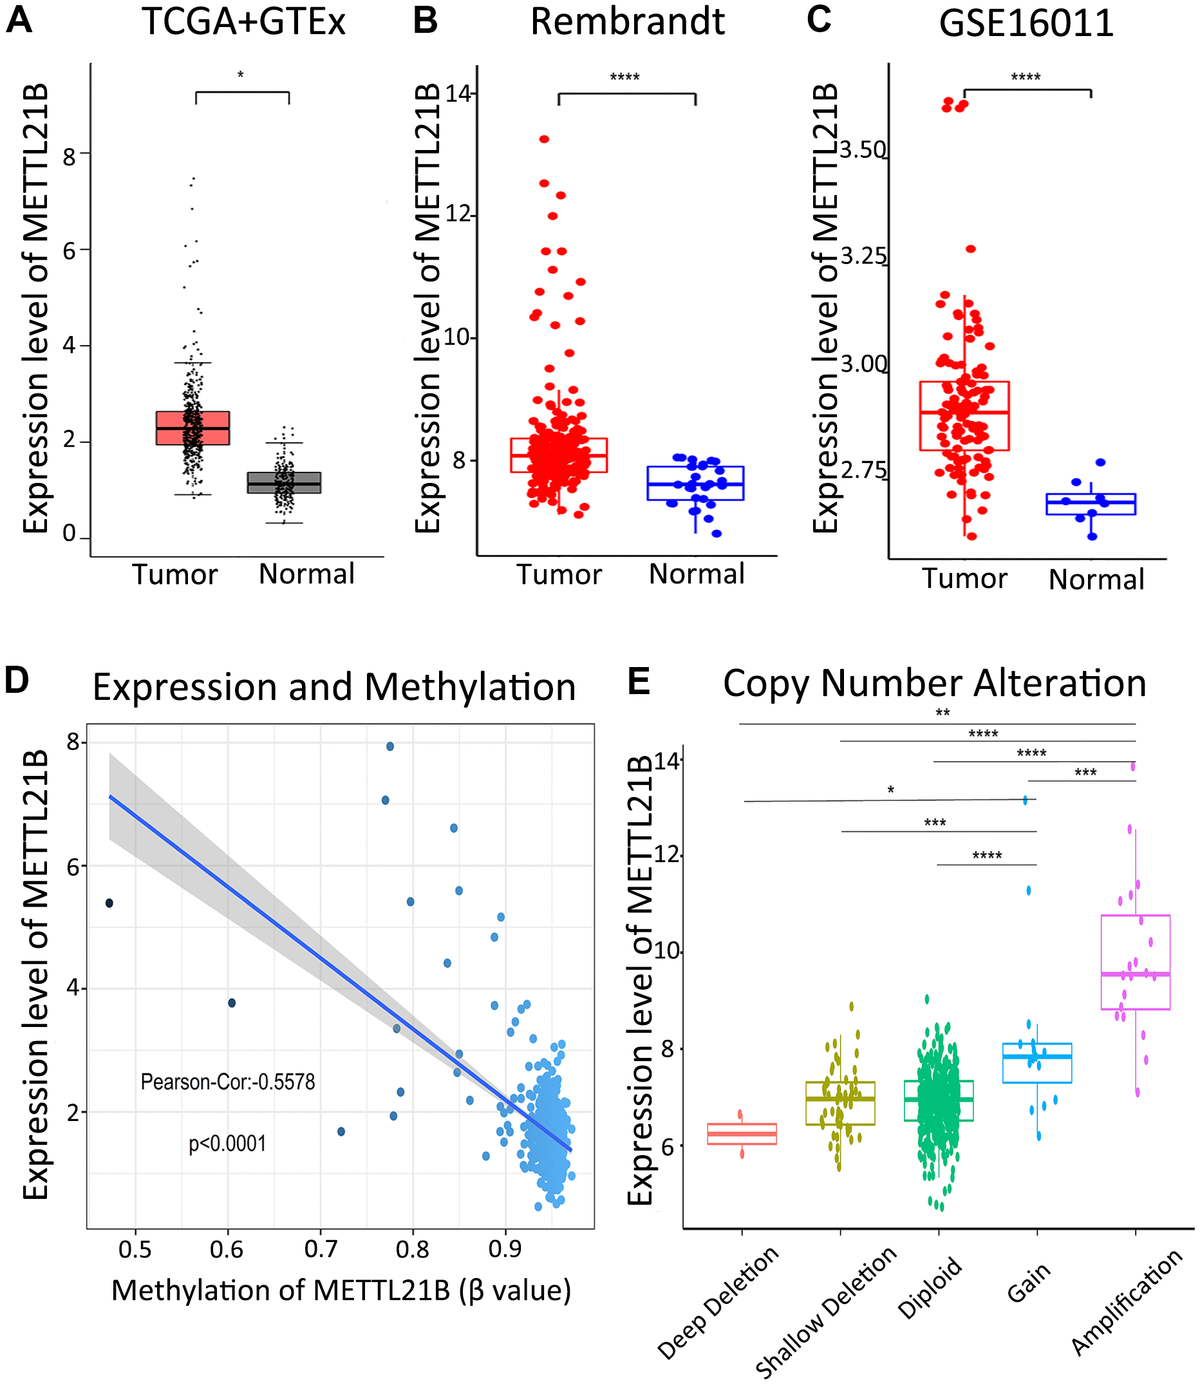 Expression of METTL21B in LGG. The expression differences of METTL21B between LGG tissues and normal samples in TCGA+GTEx (A), Rembrandt (B) and GSE16011 (C) dataset; (D) The correlation between expression and methylation of METTL21B. (E) Copy number gain/amplification of METTL21B markedly increased the mRNA expression. *P